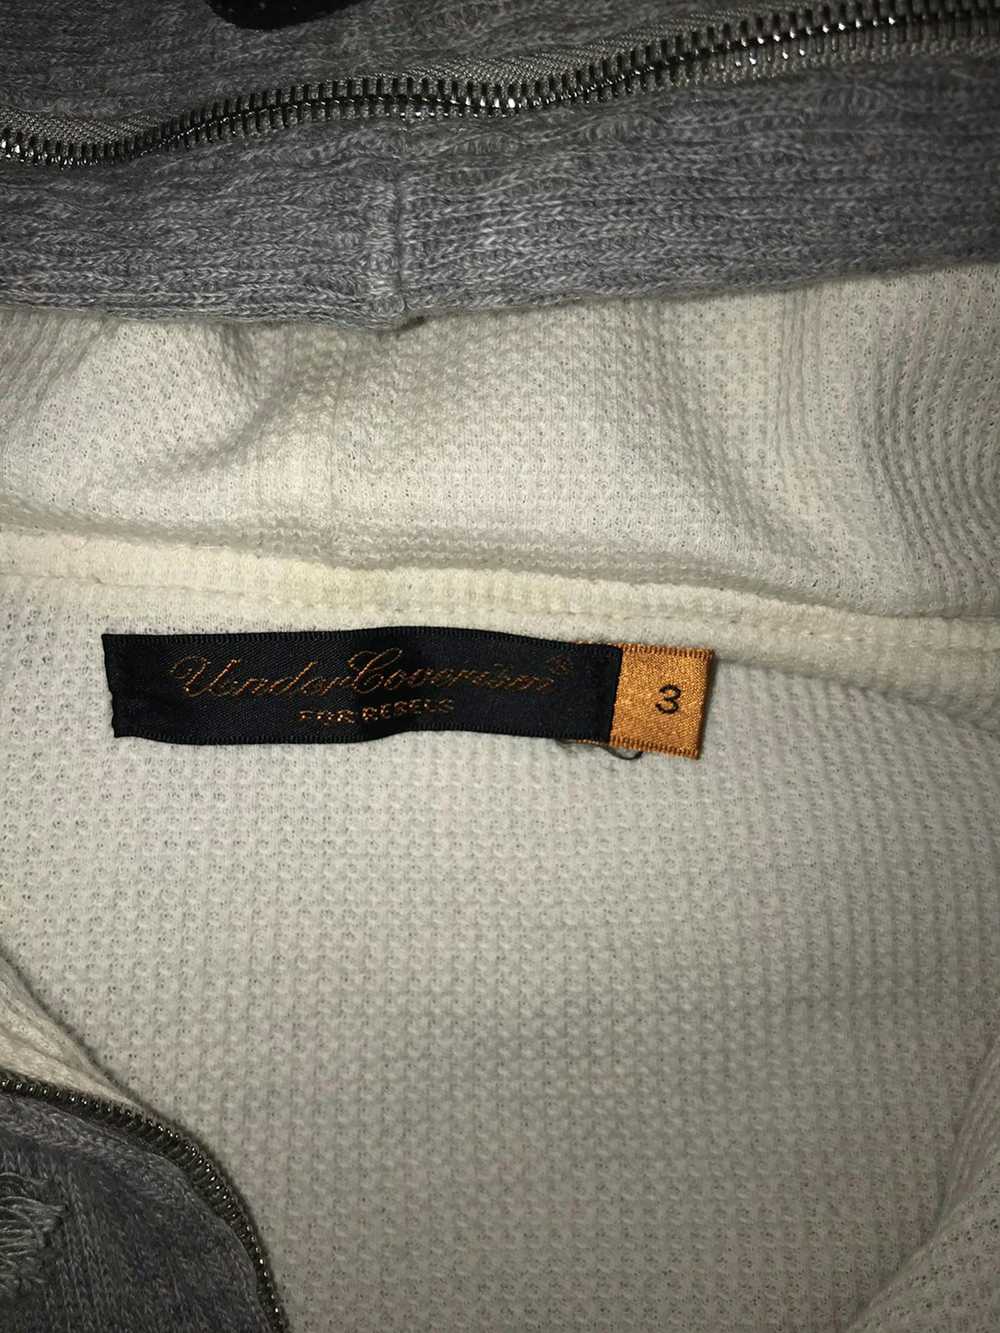 Undercover undercover hoodie - image 2